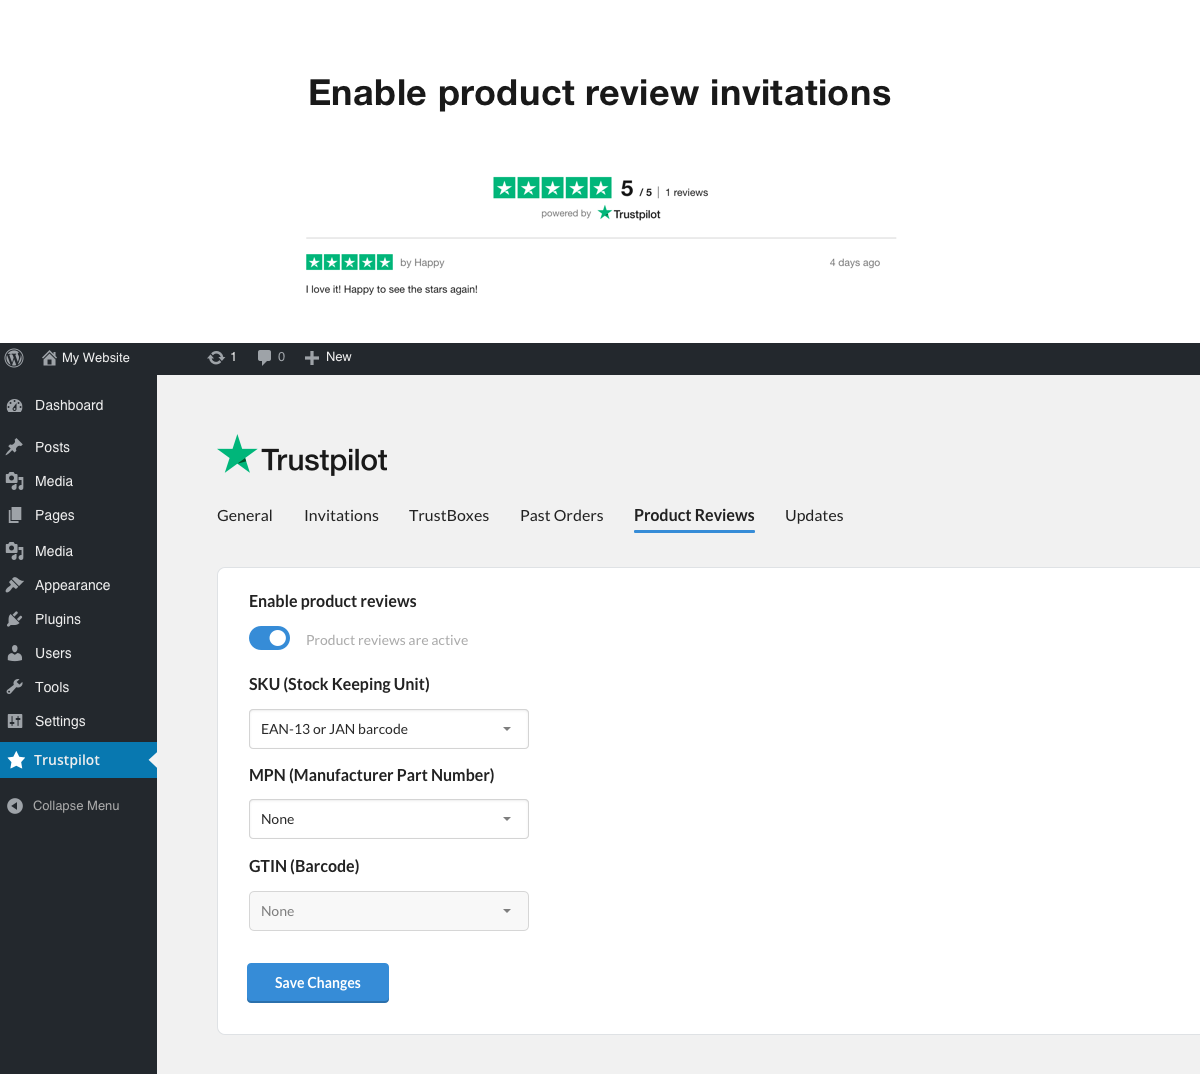 Enable product review invitations